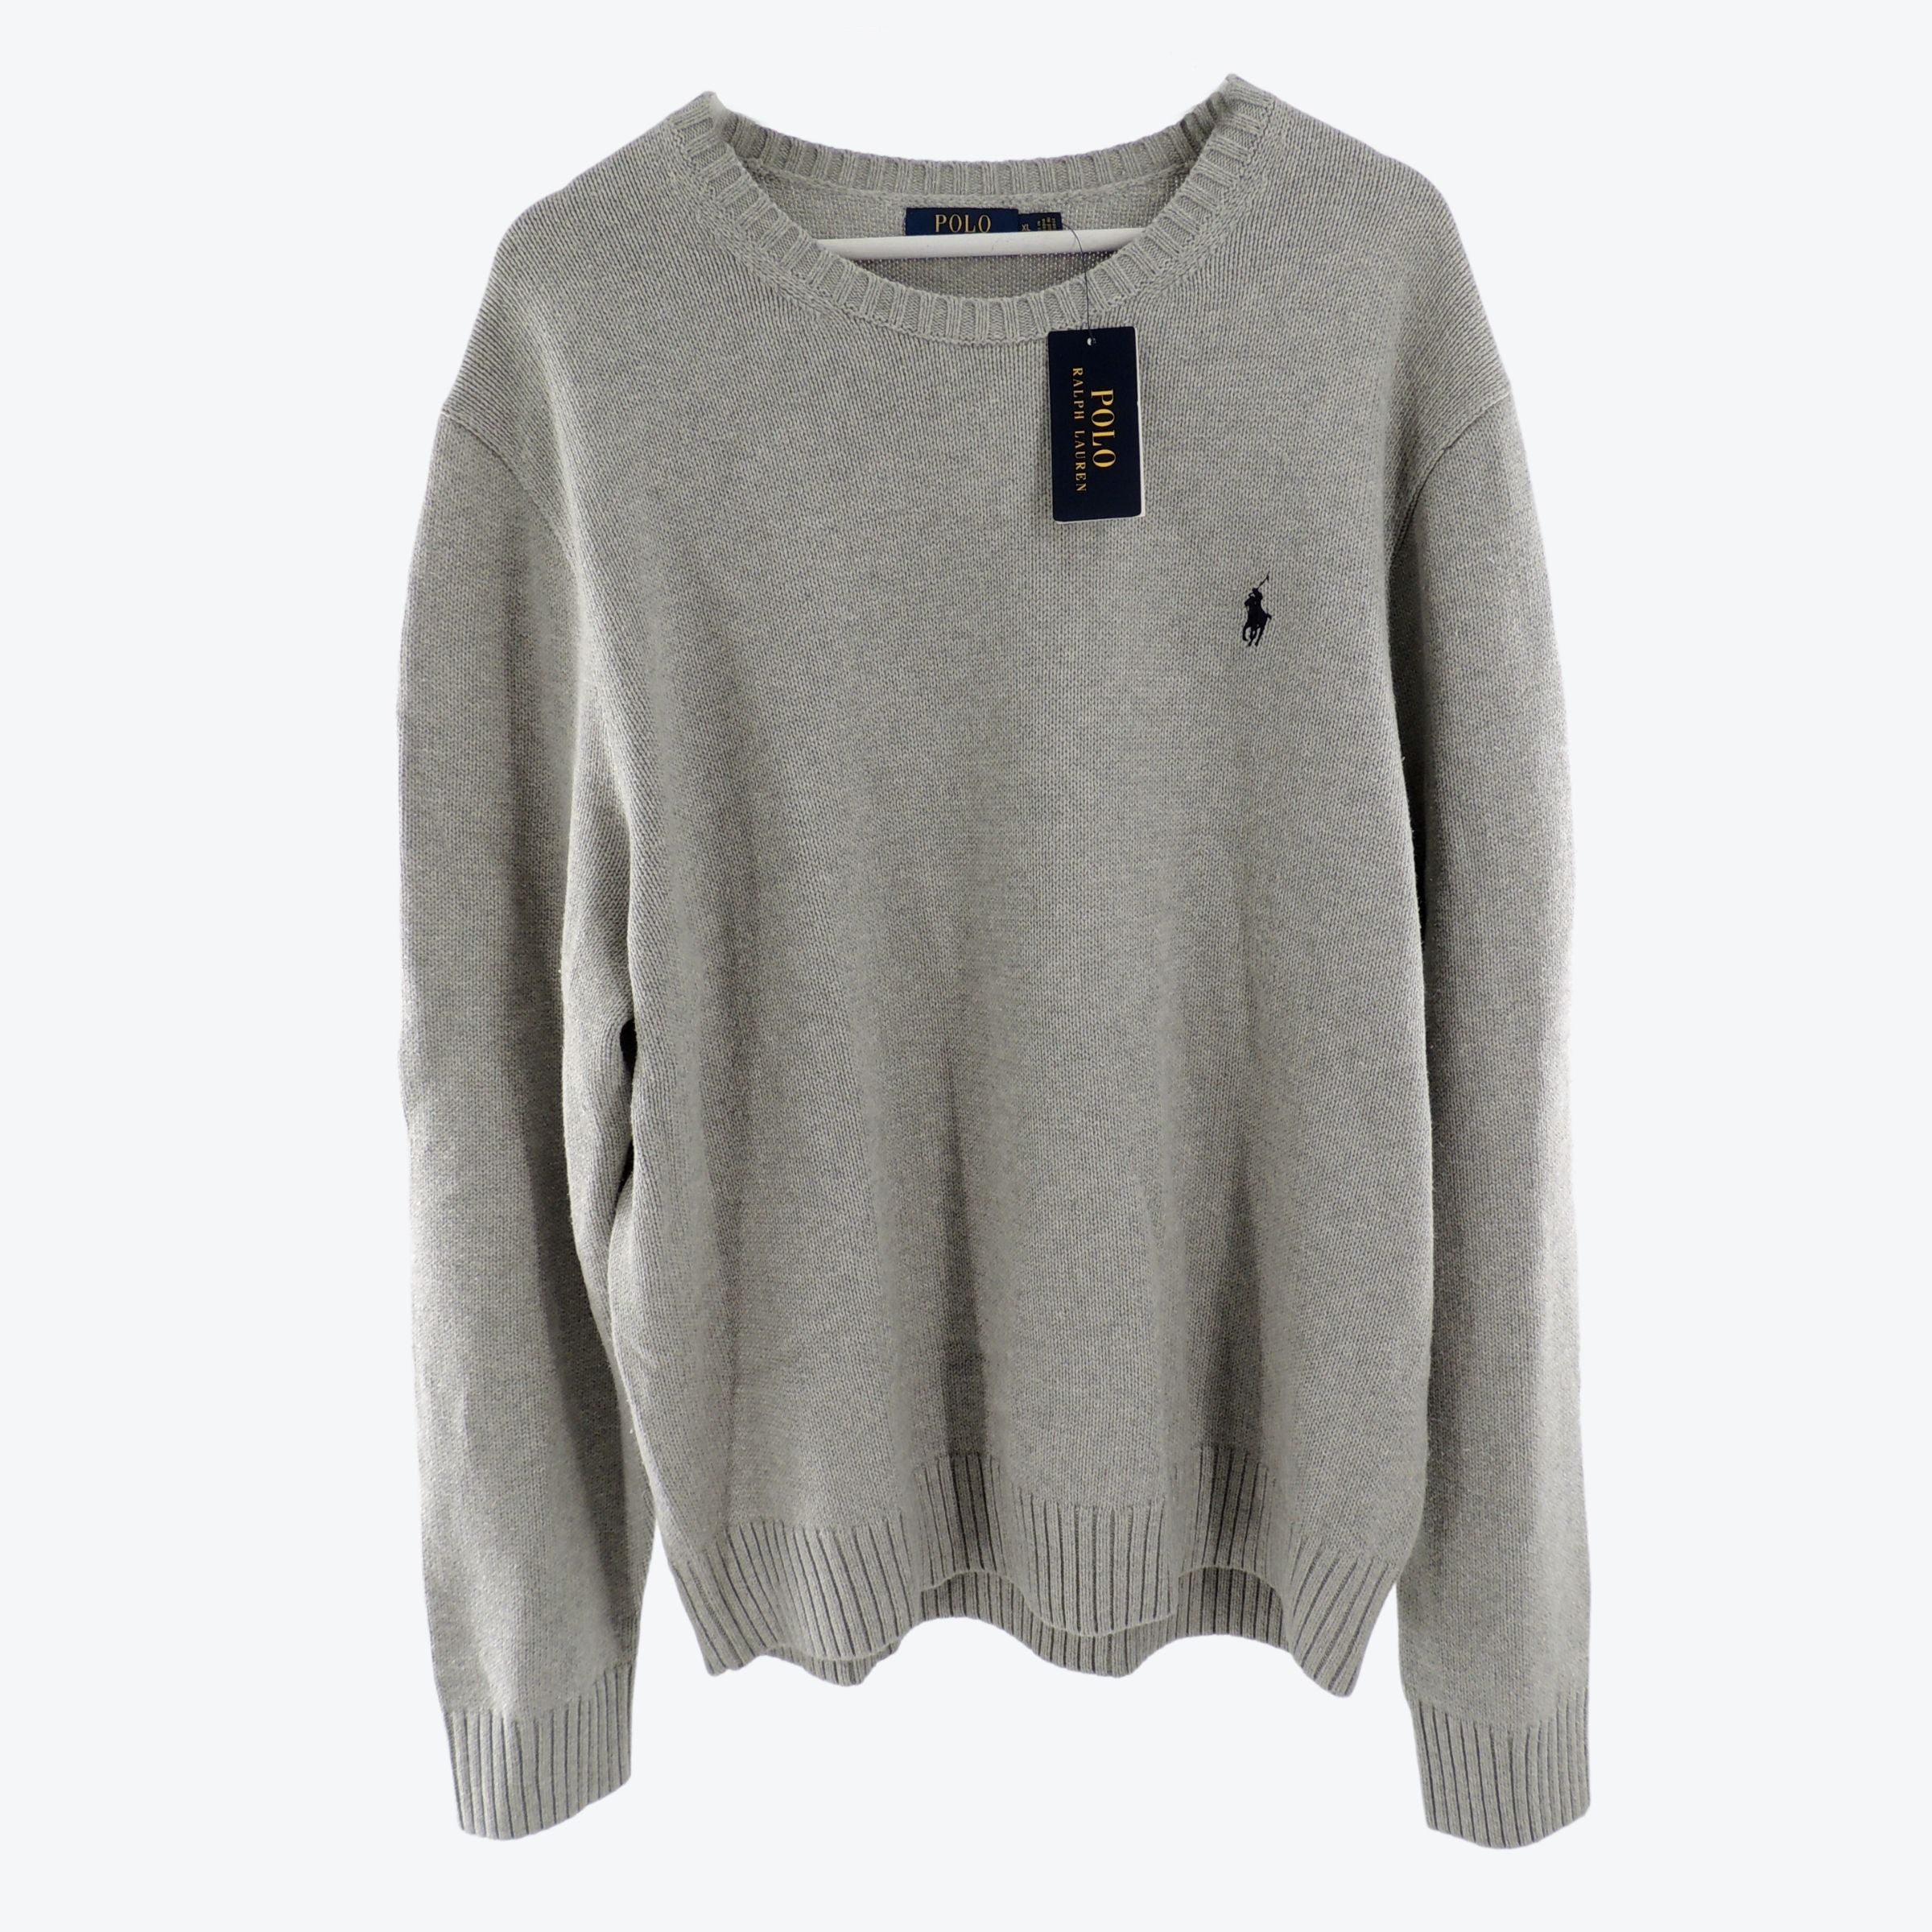 Polo Ralph Lauren Classic Knitted Sweater in Grey XL